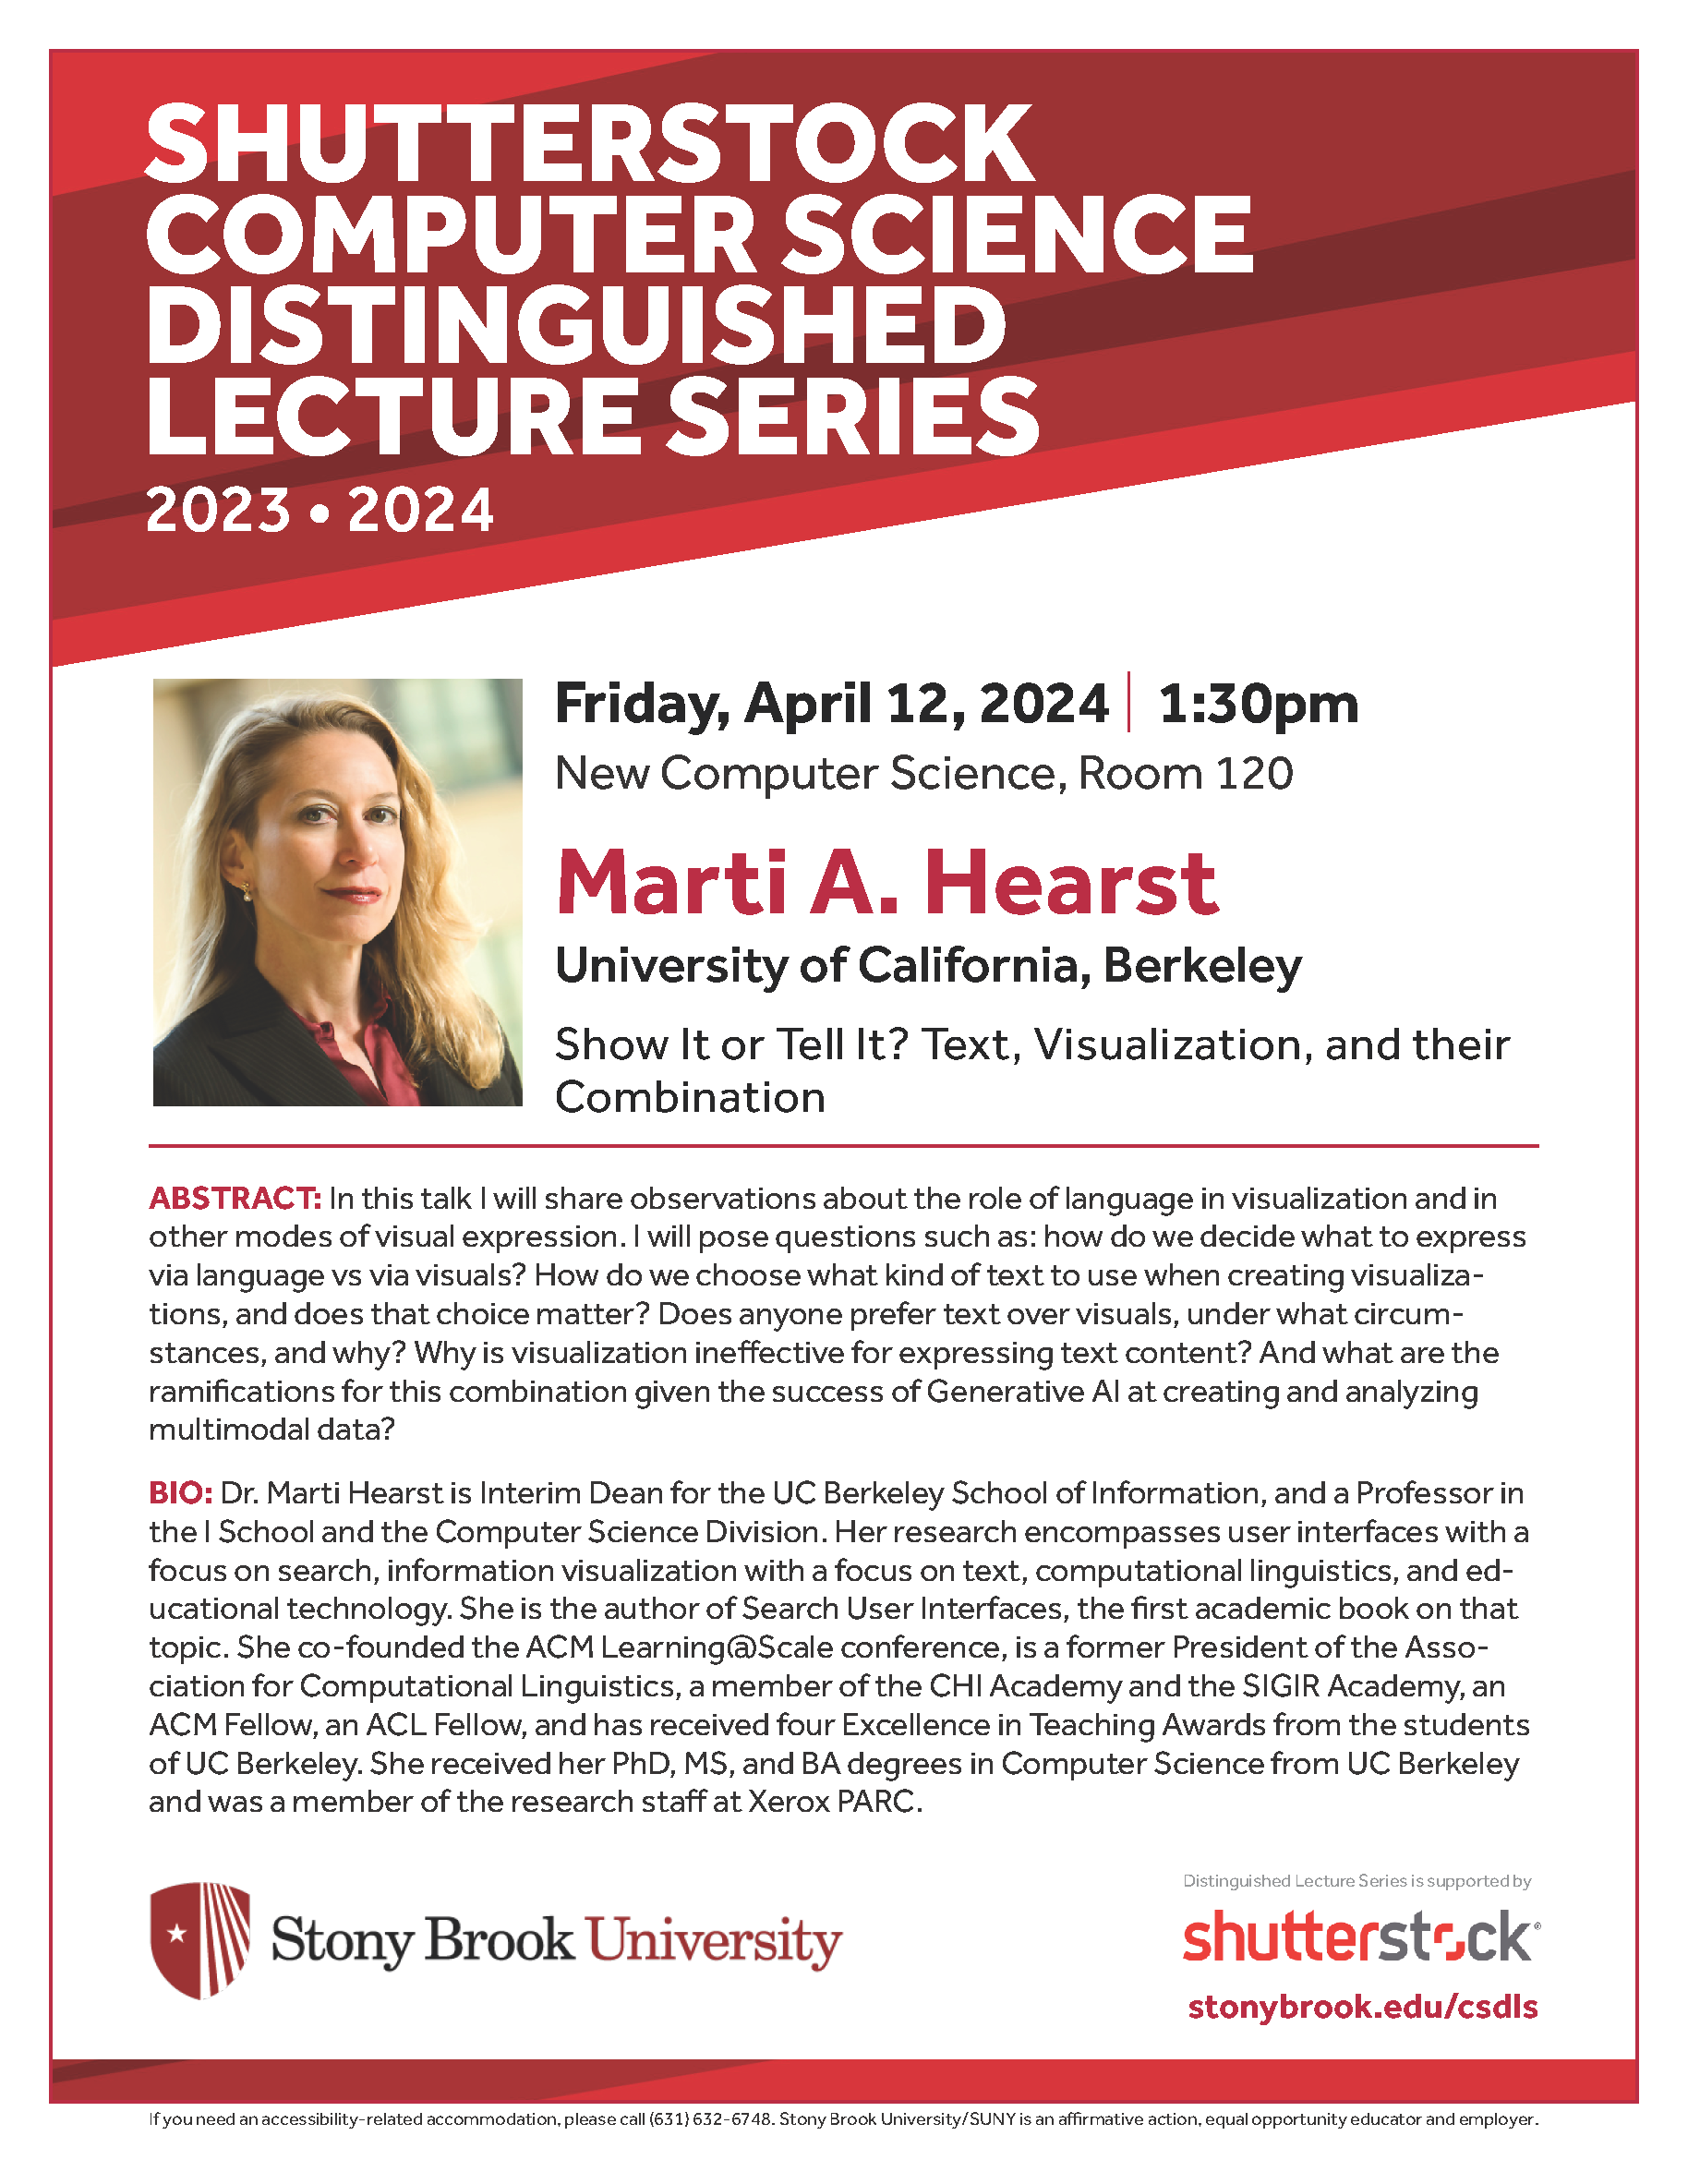 Text, Visualization and their Combination with Marti A. Hearst